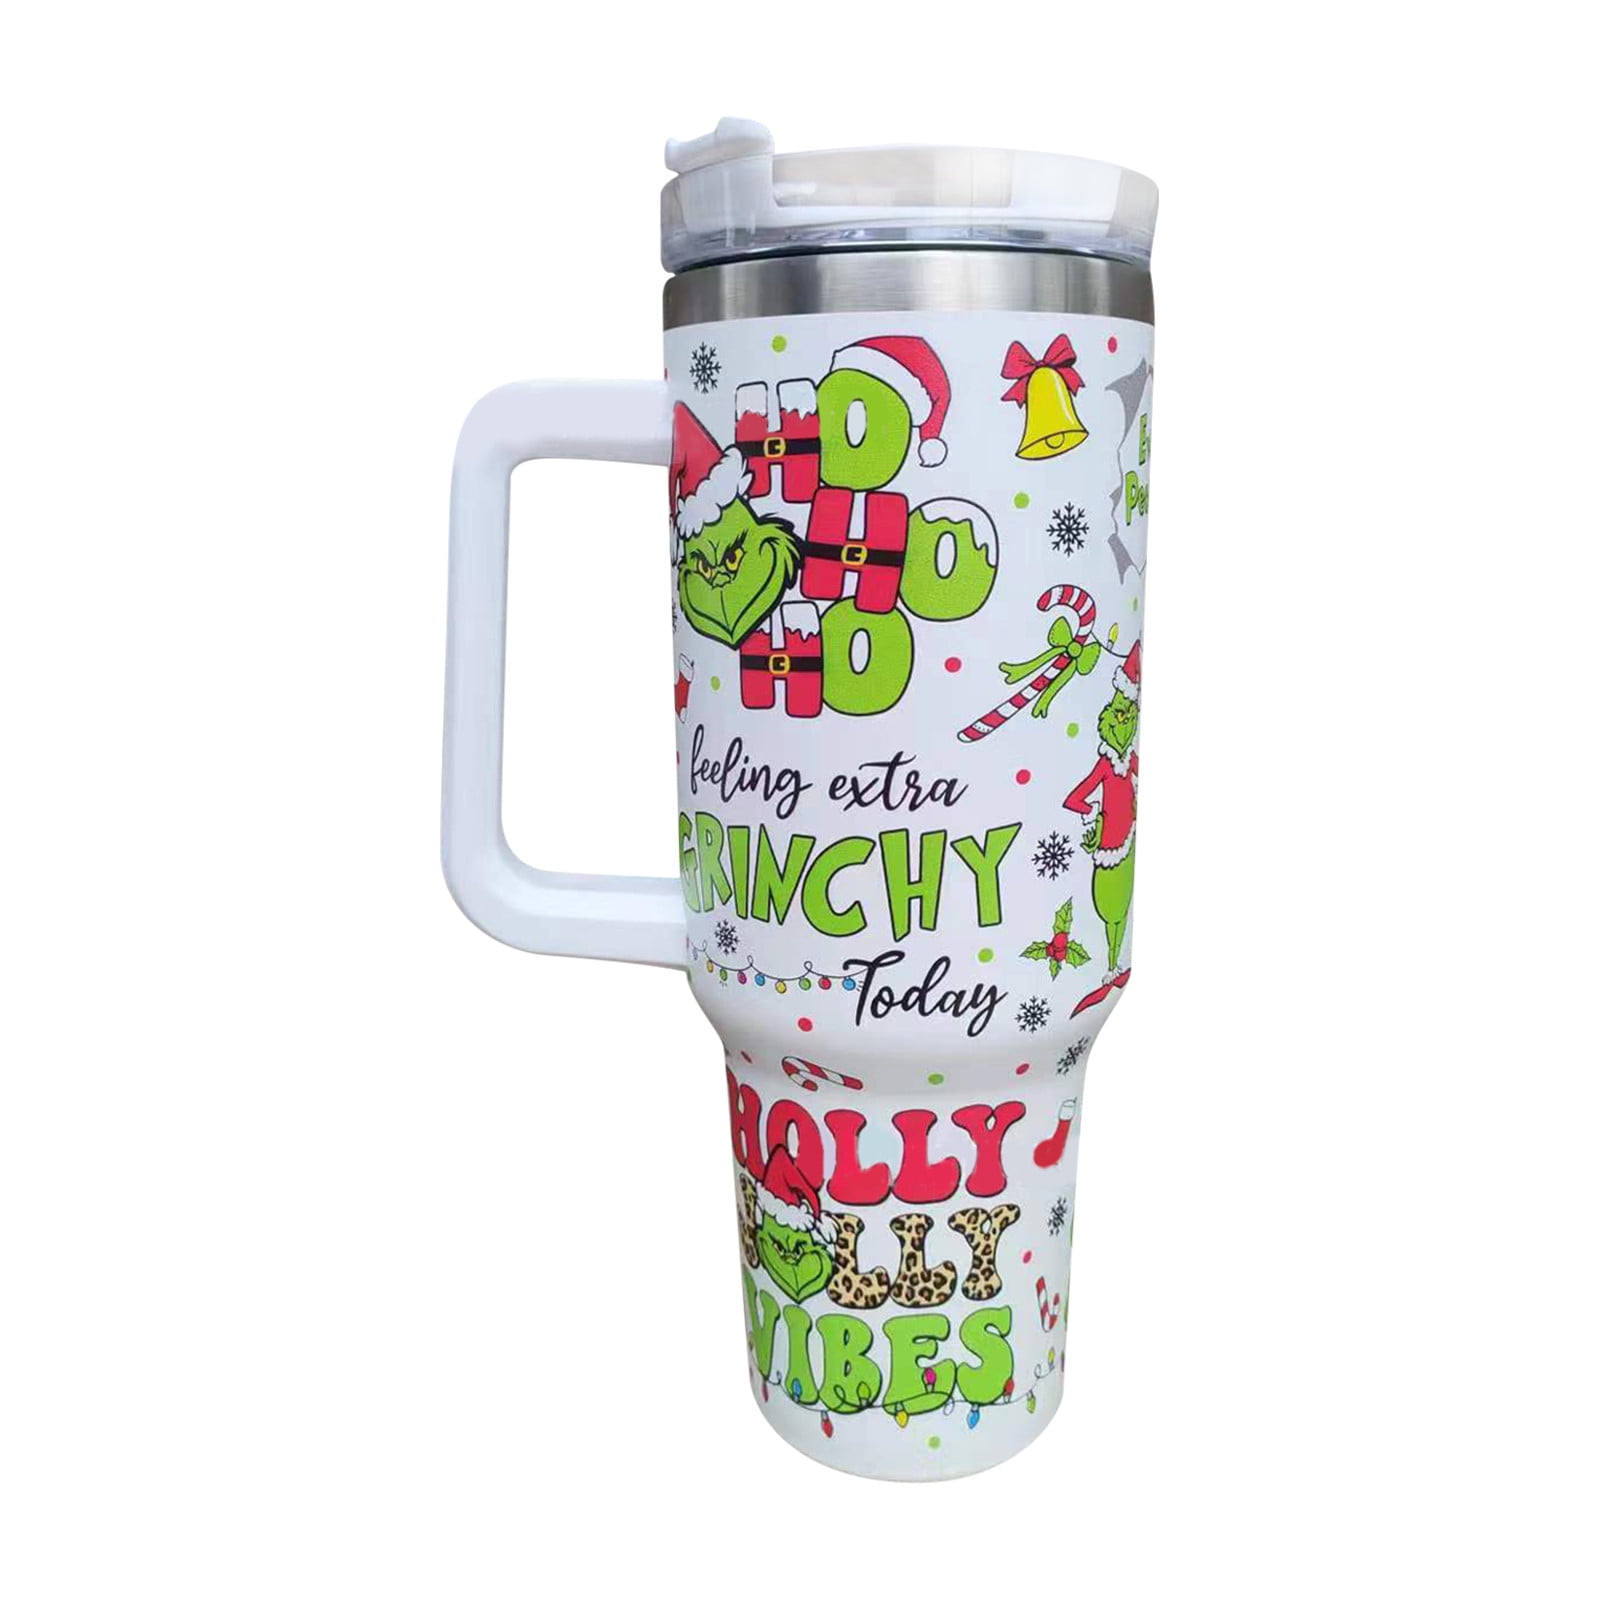 40 oz Tumbler with Handle and Lid, Grinch Tumbler Cup, Stainless Steel  Grinch Cup Reusable Insulated Cup and Water Tumbler Cup with Grinch  Pateern